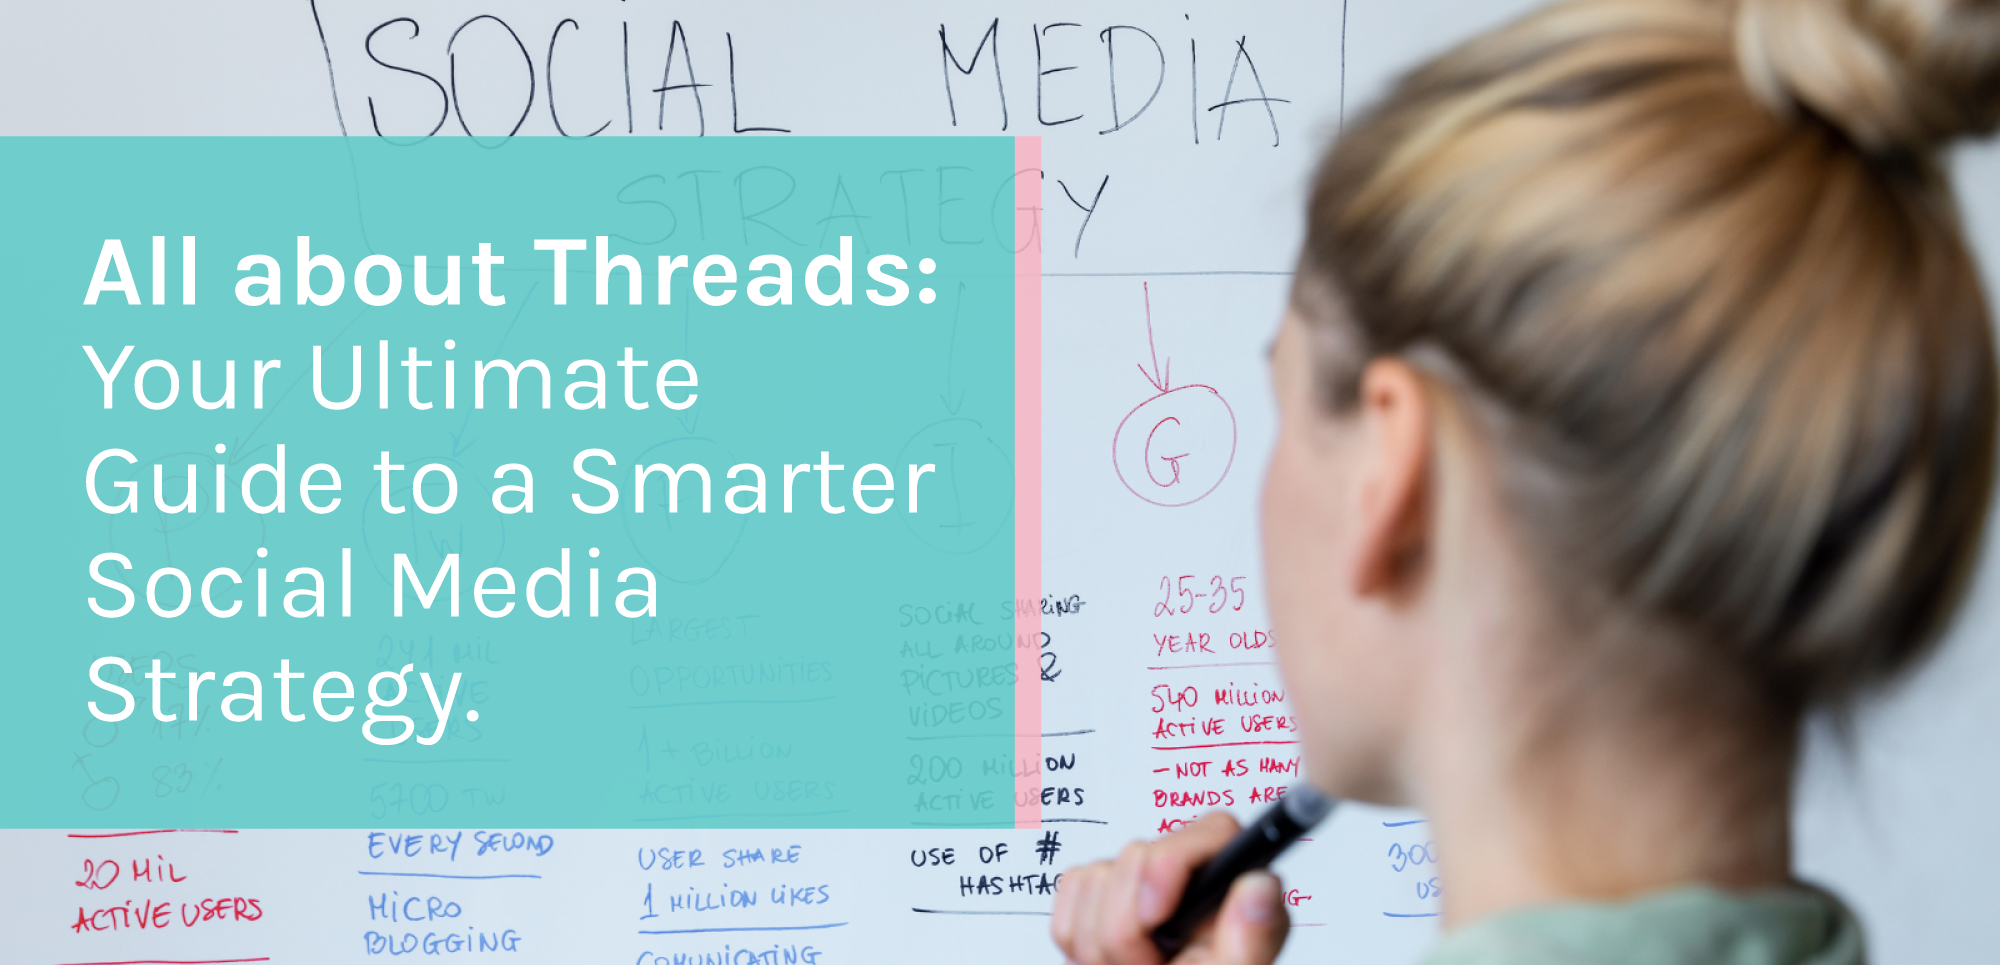 All about Threads: Your Ultimate Guide to a Smarter Social Media Strategy 